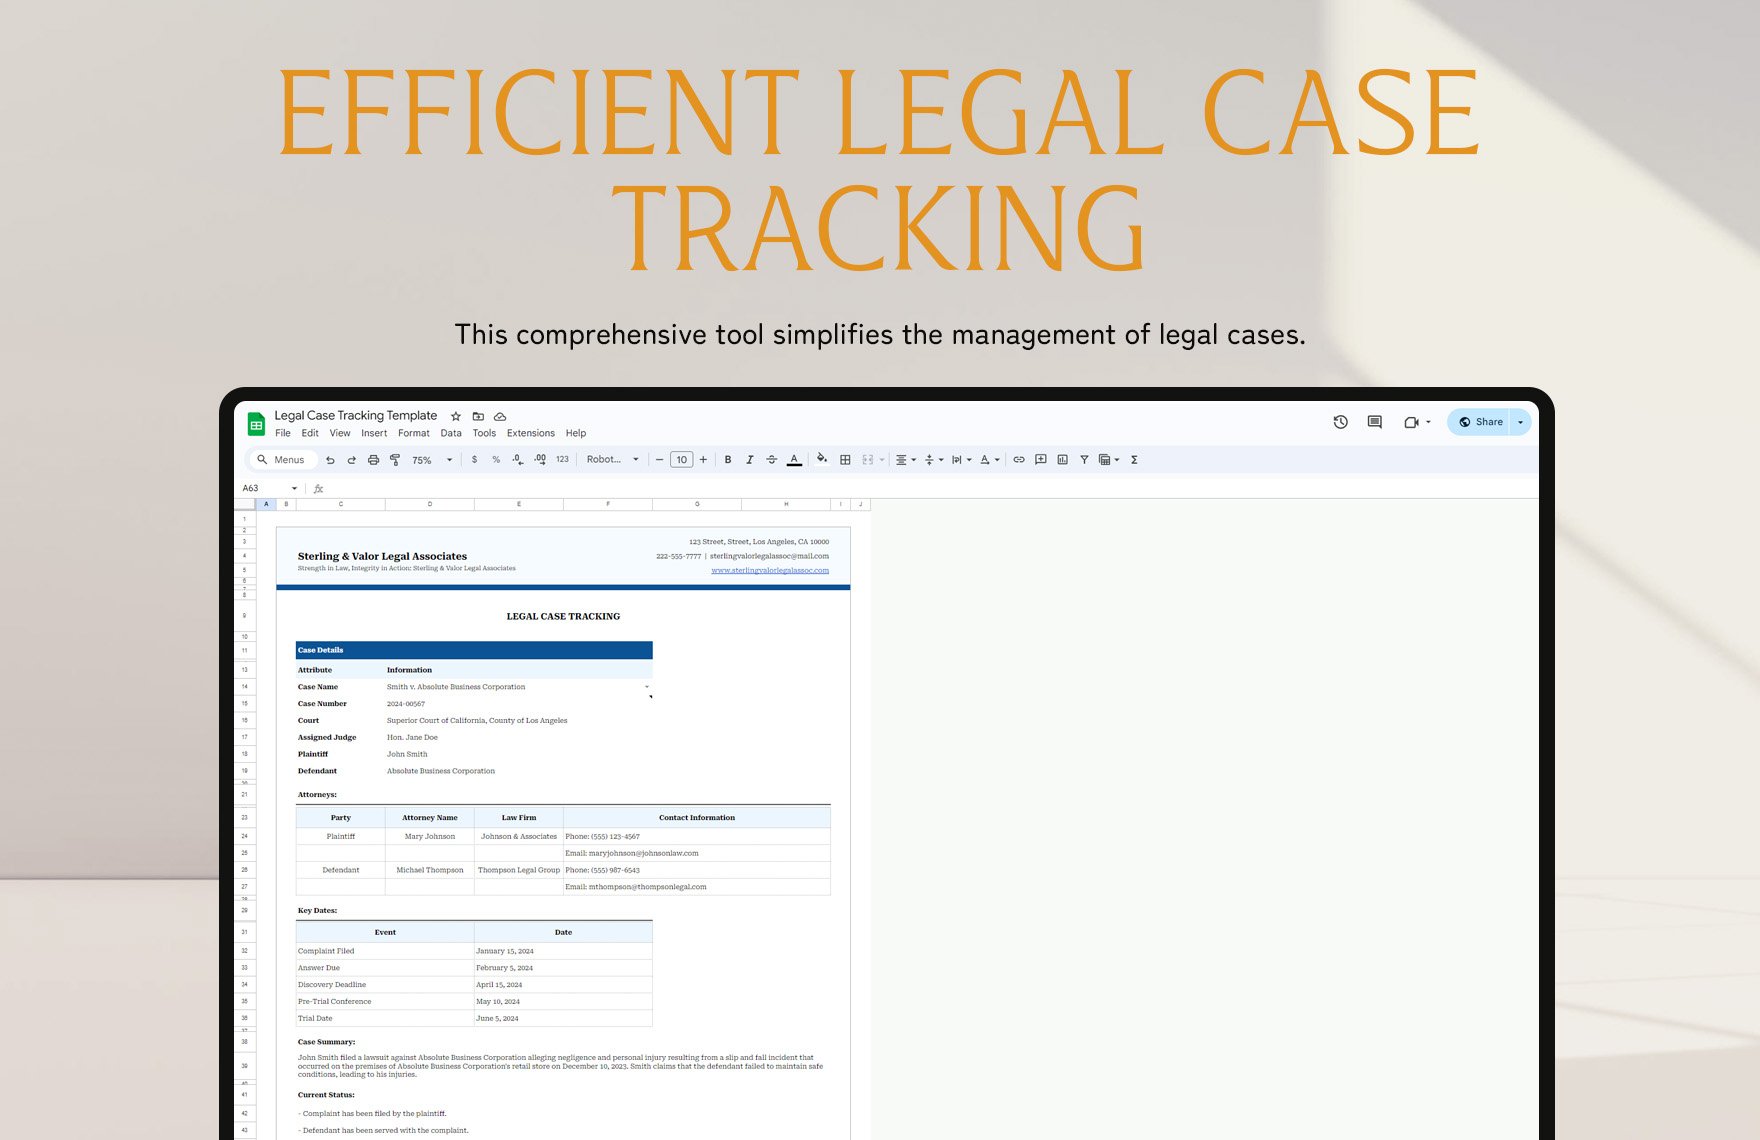 Legal Case Tracking Template